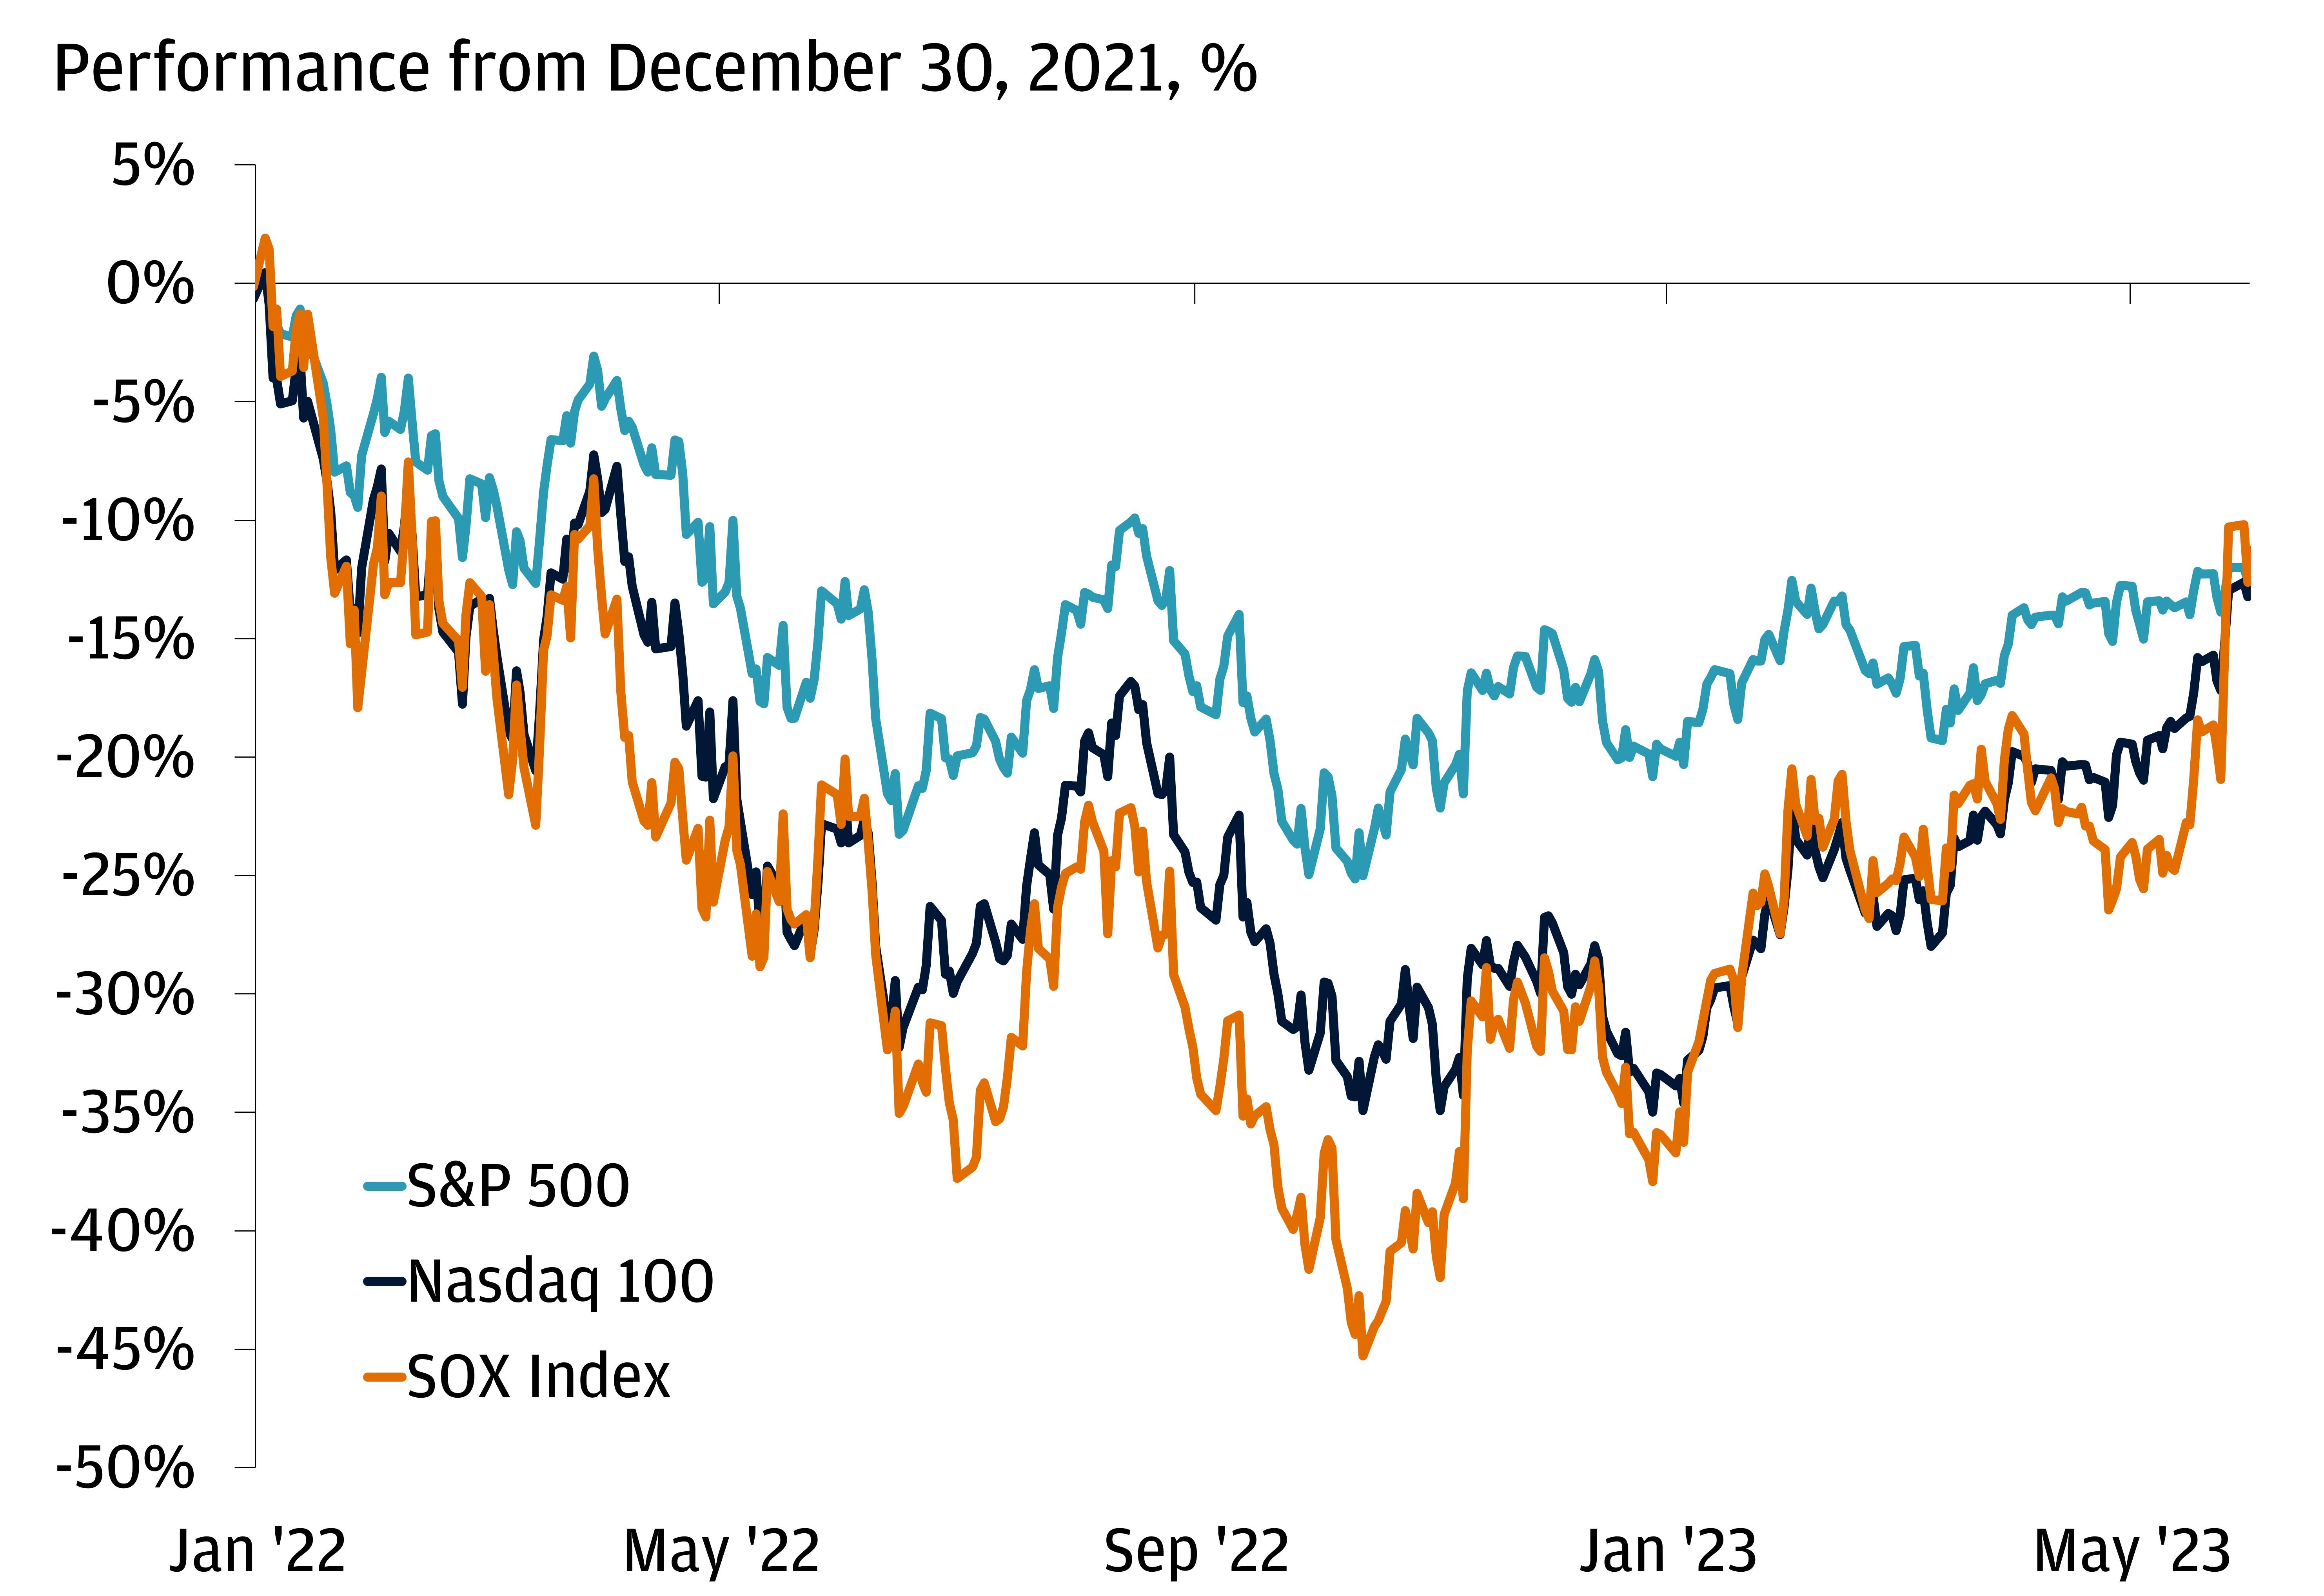 The chart describes the % performance of S&P 500, Nasdaq 100 and the SOX Index from December 30, 2021.